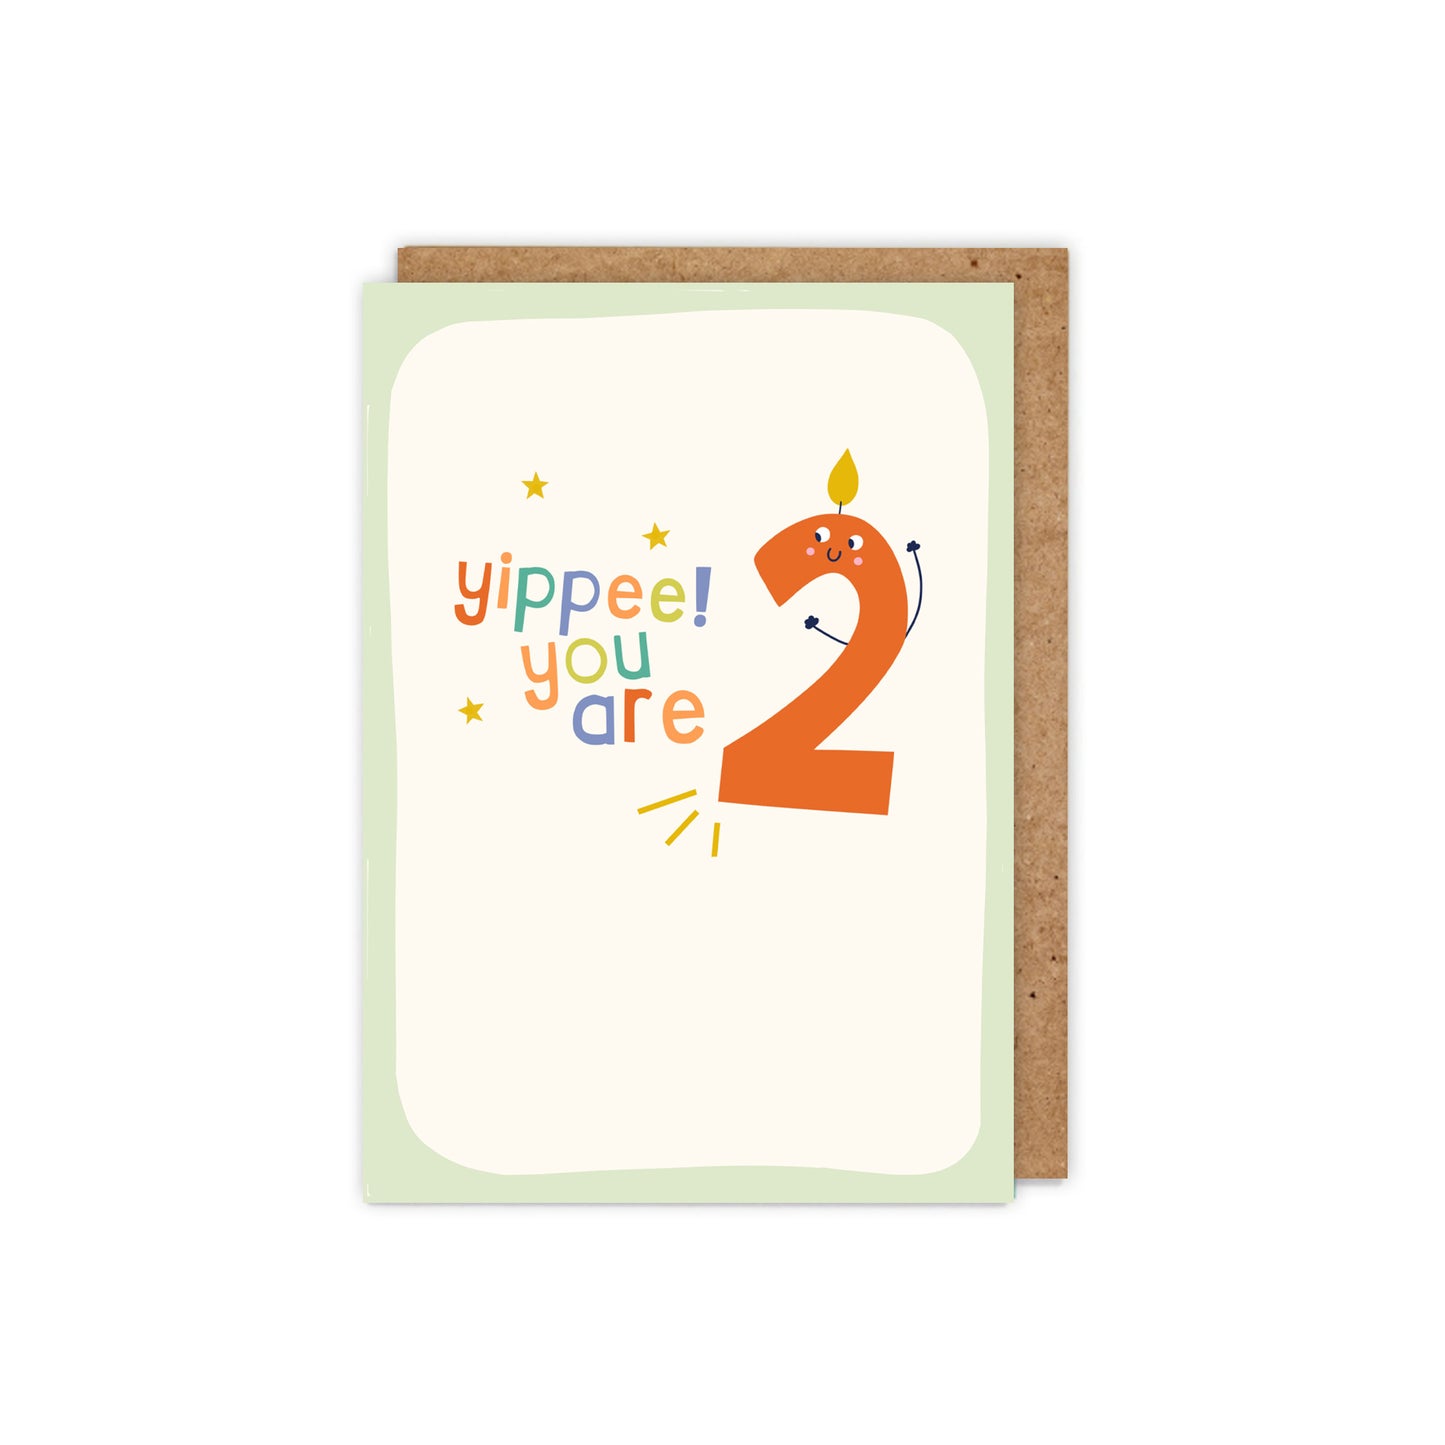 Yippee! You are 2! 2nd Birthday Card